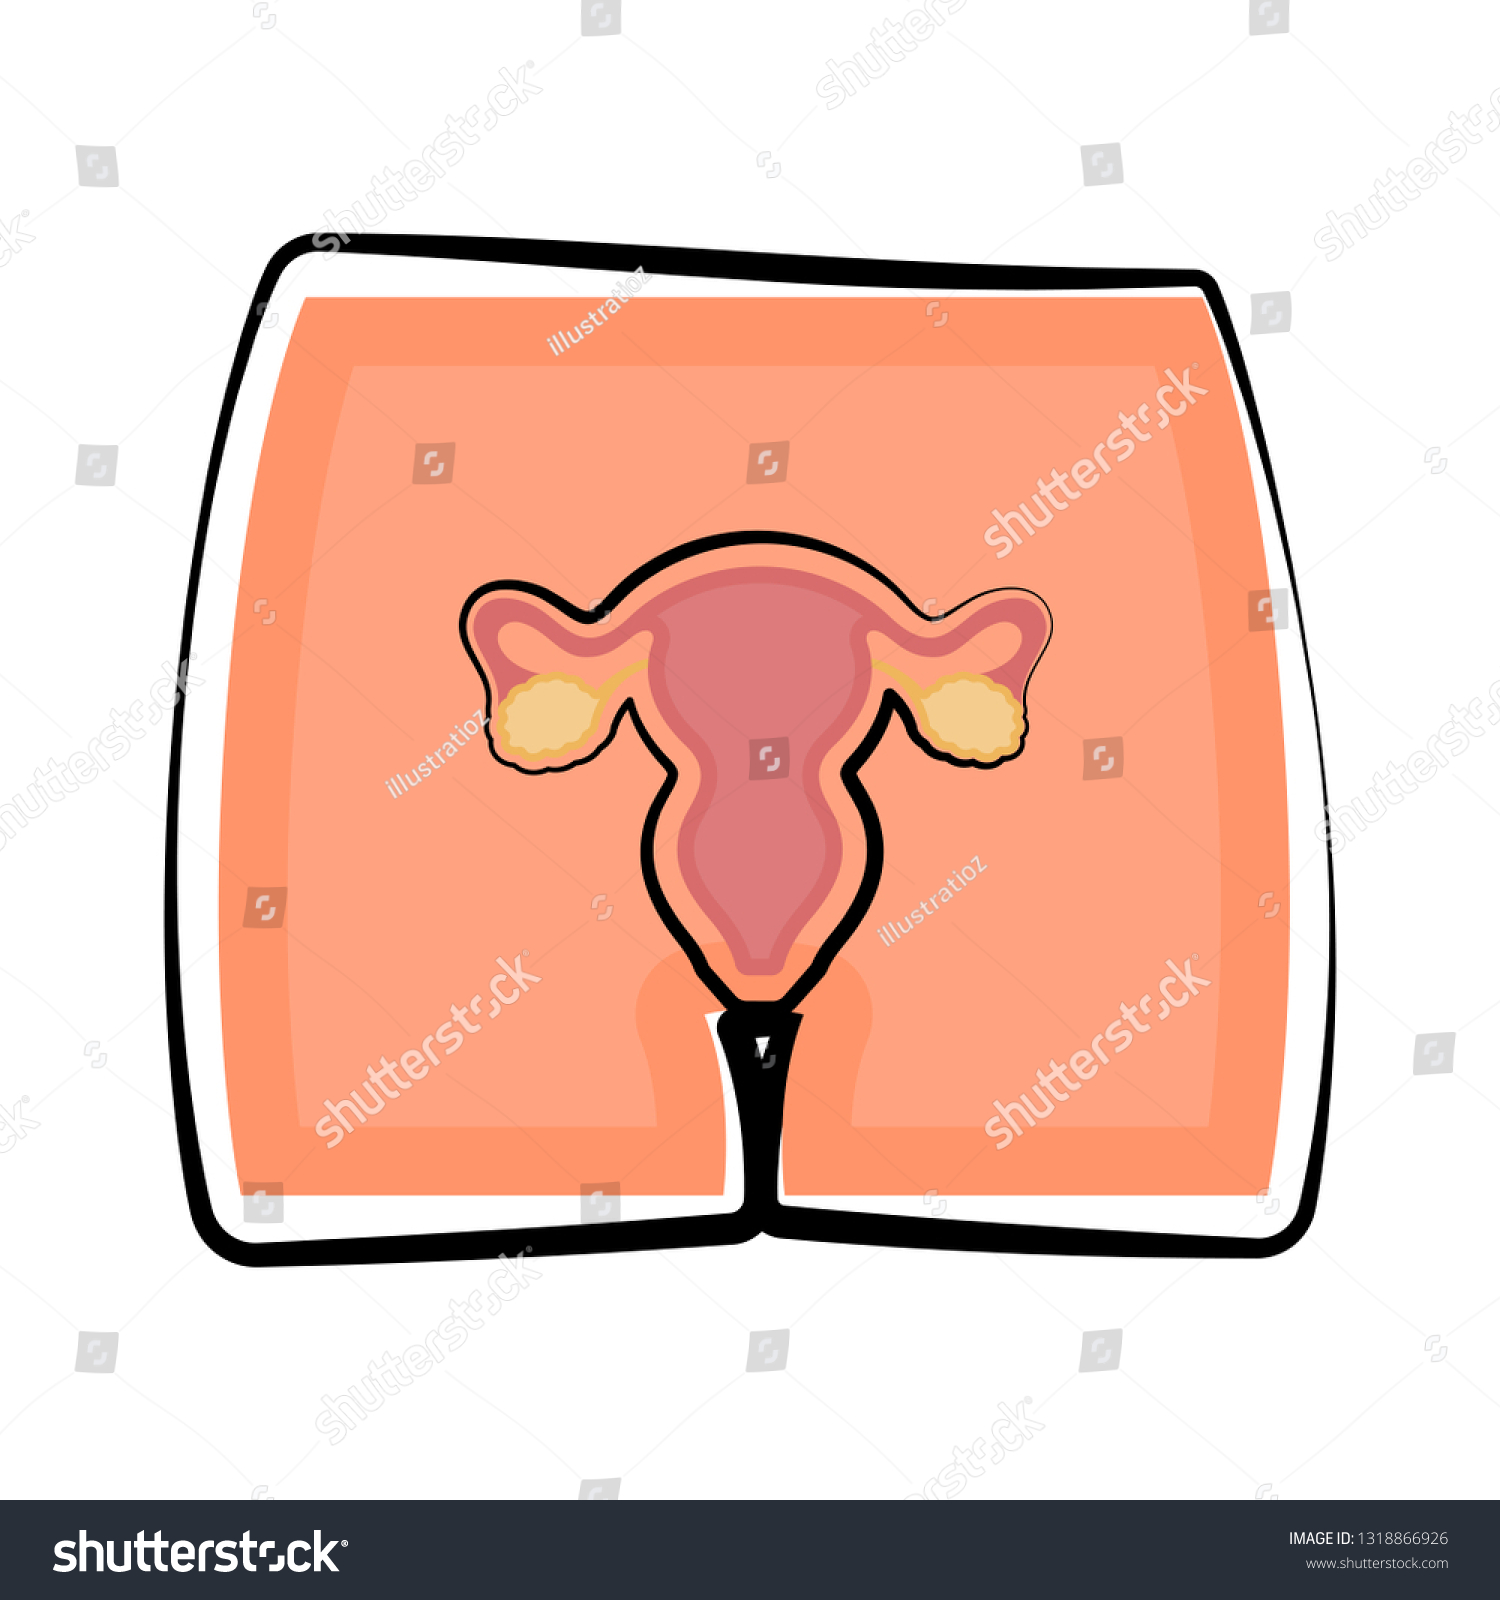 Female Reproductive System Body Colored Sketch Stock Vector Royalty Free 1318866926 Shutterstock 2941